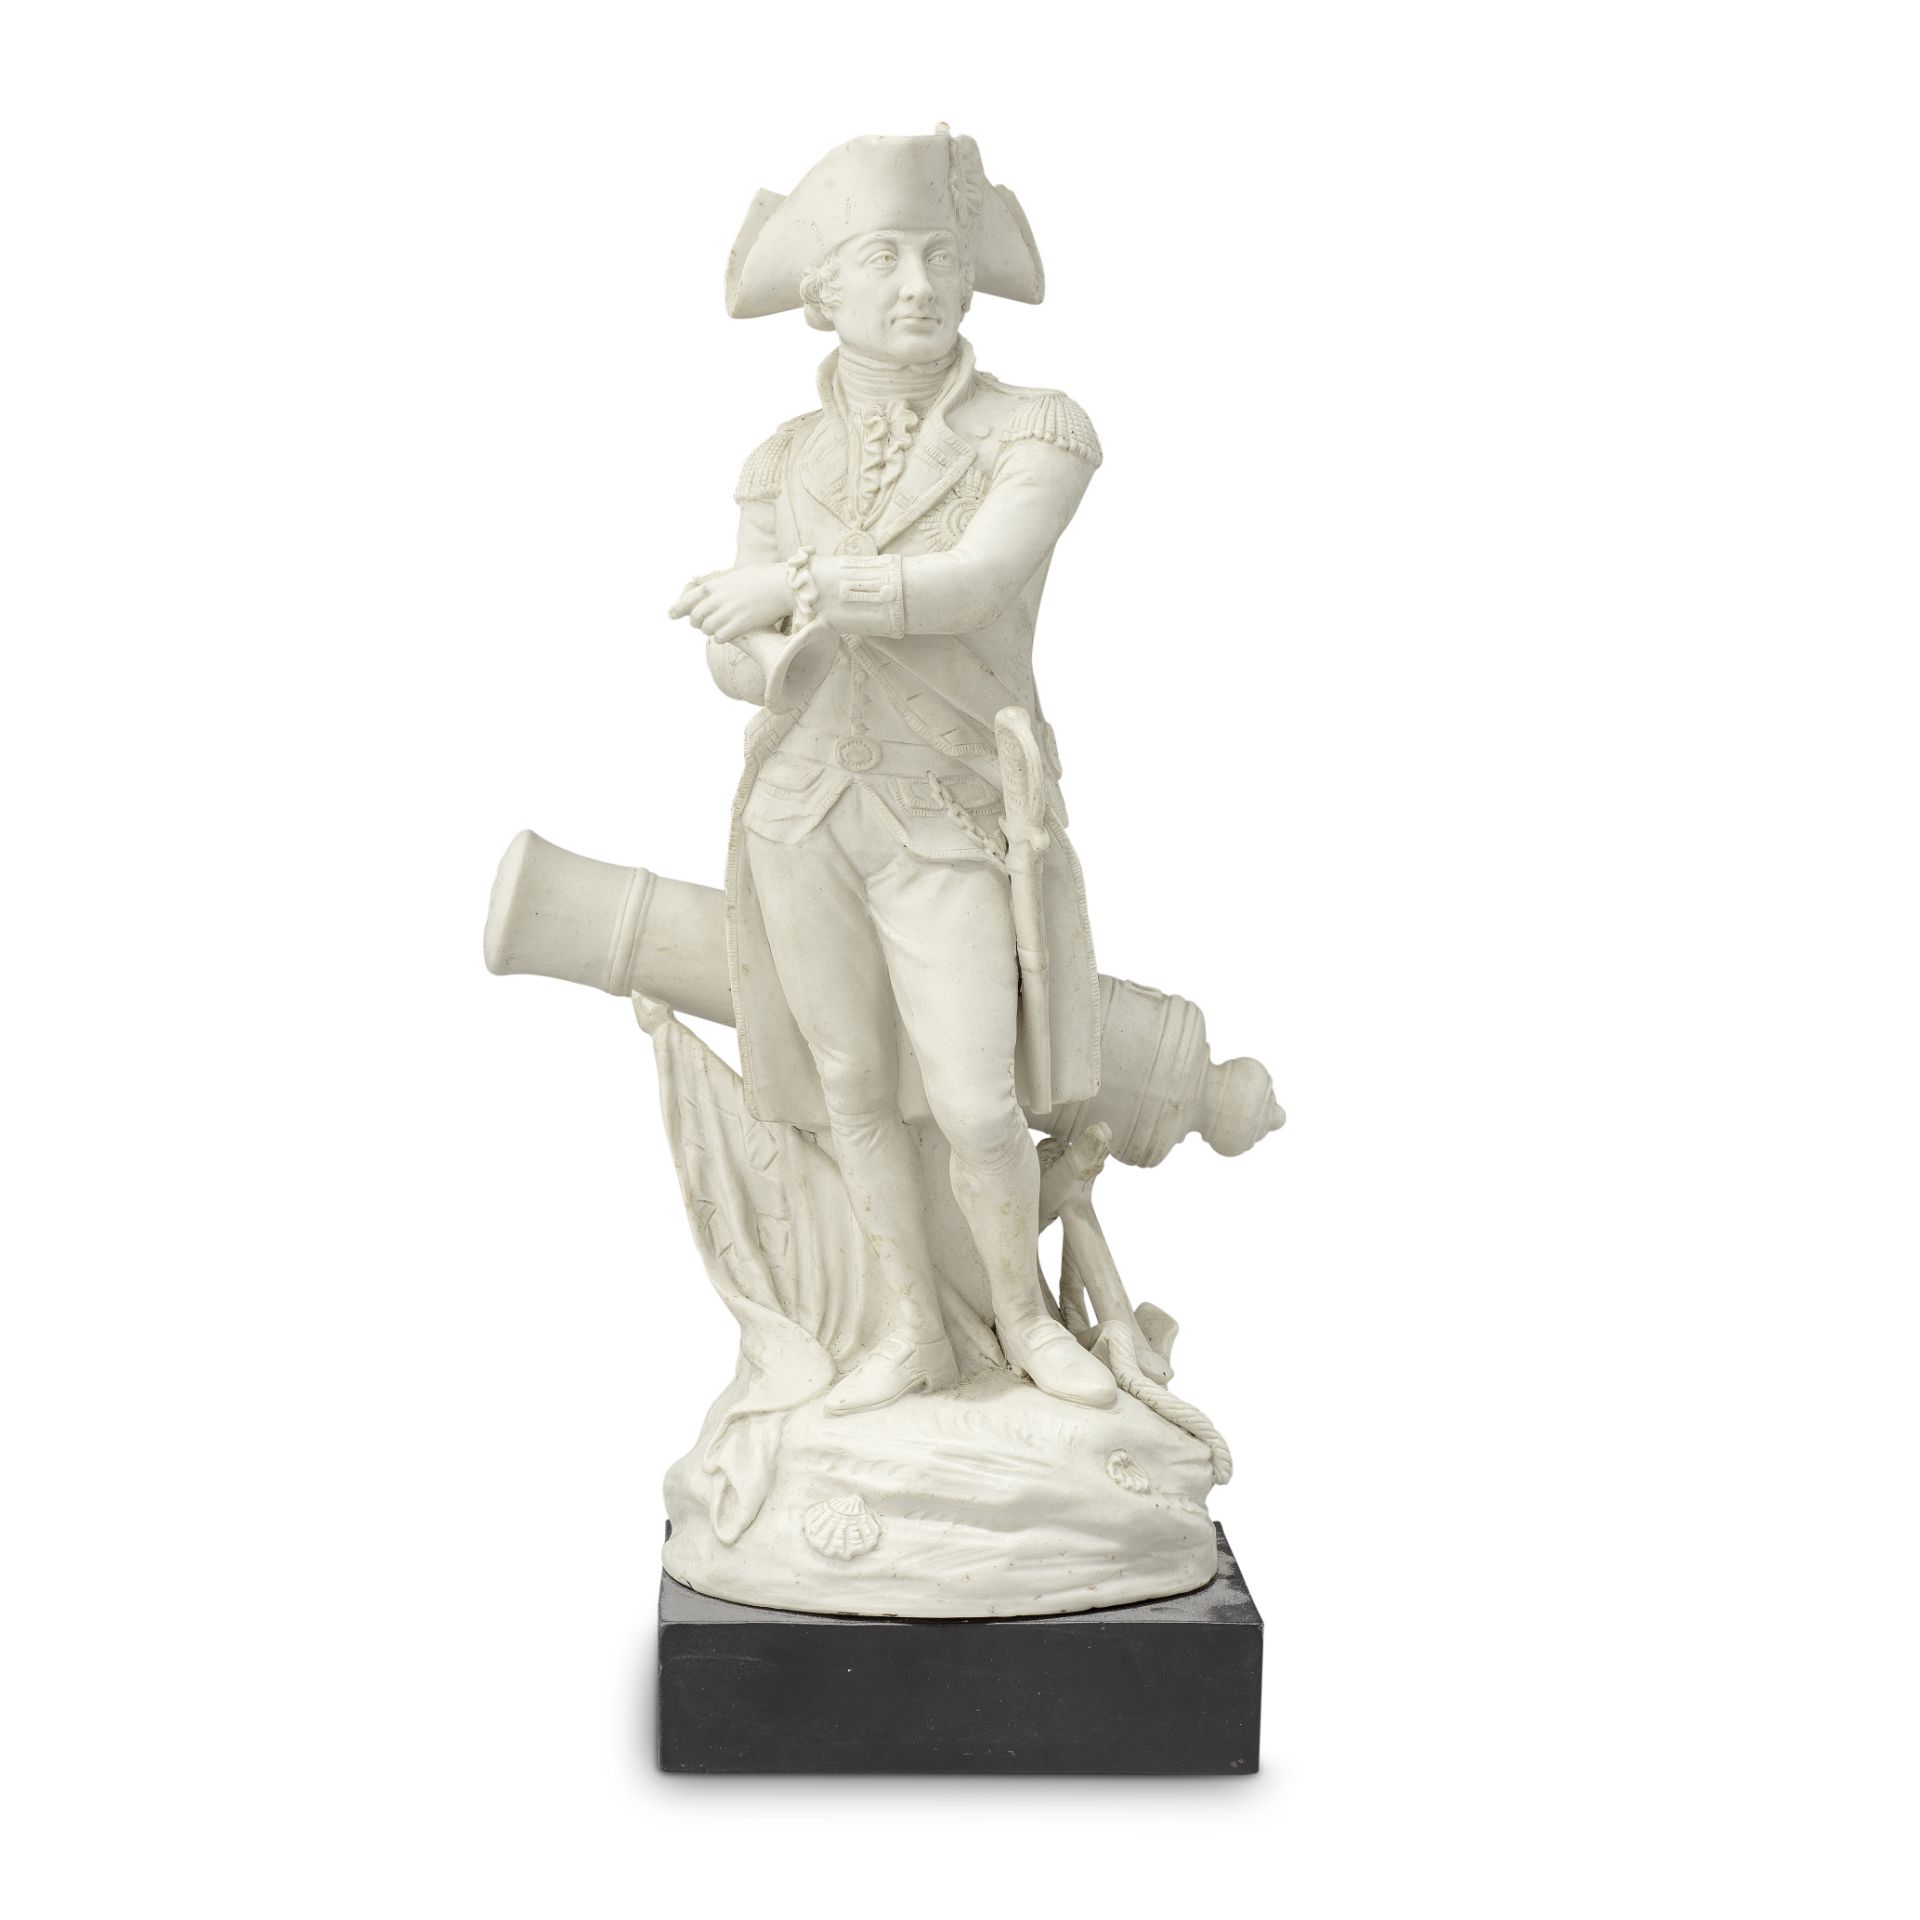 Nelson Family Provenance: An important white stoneware figure of Nelson, circa 1800